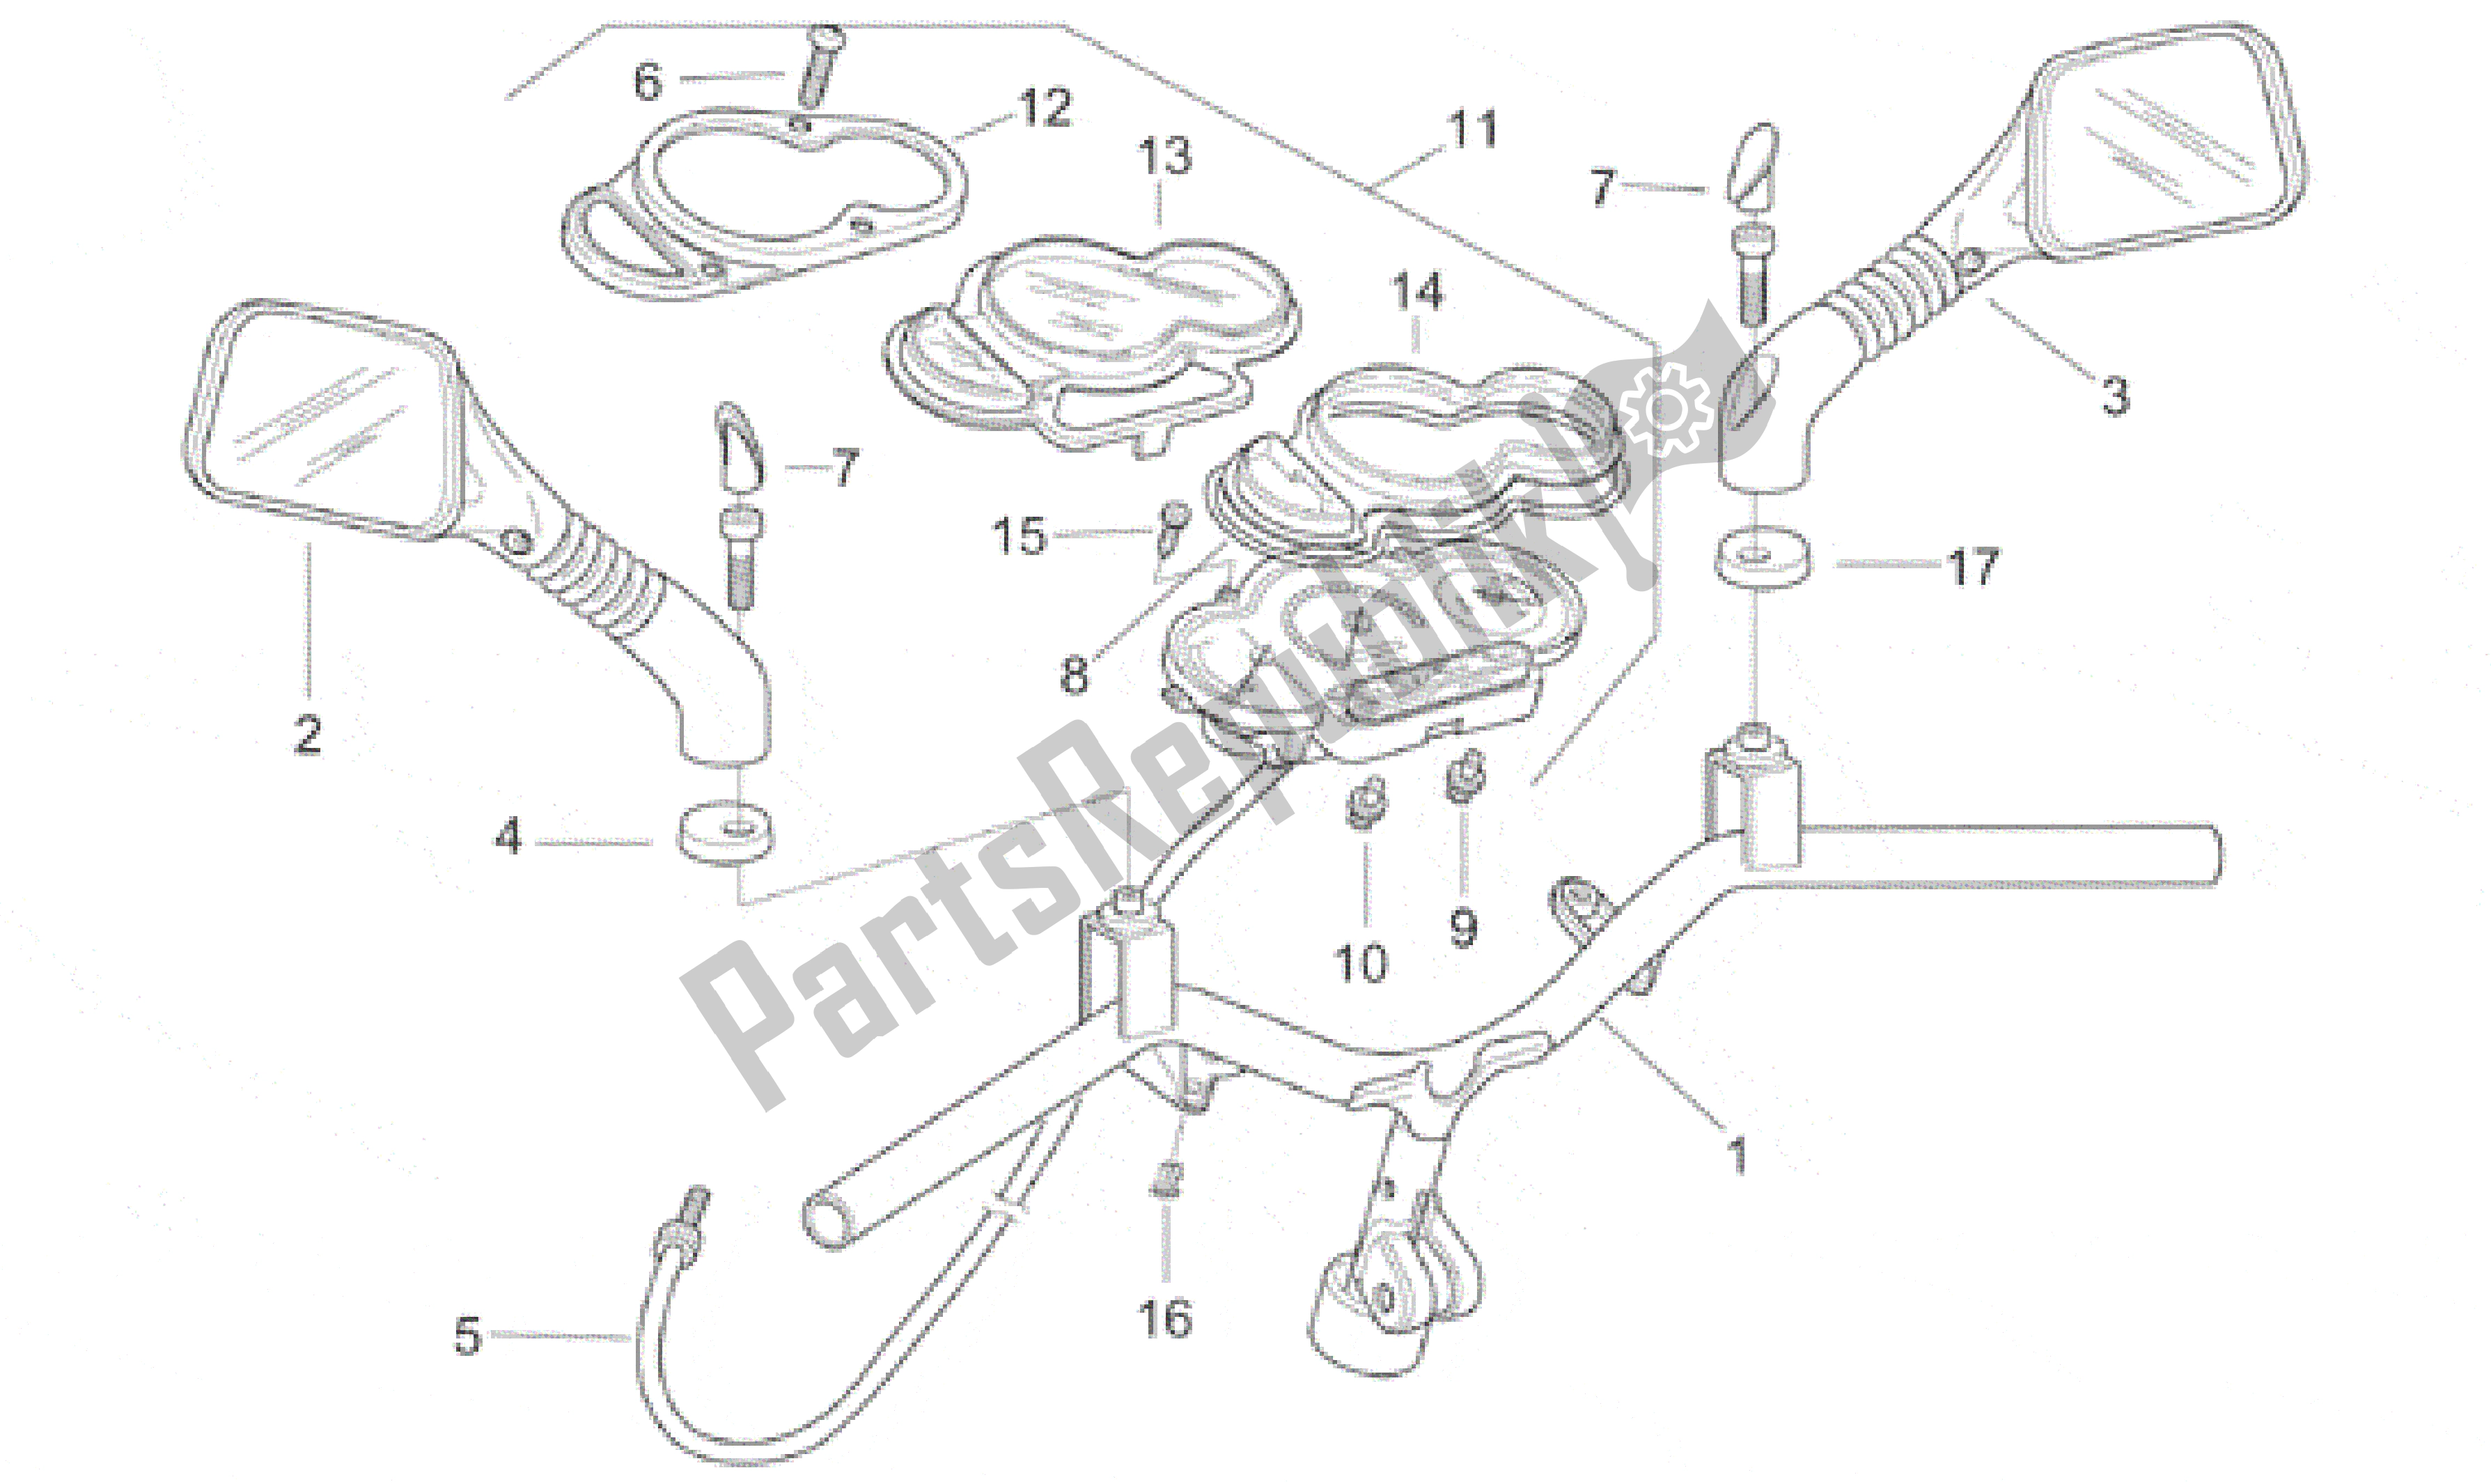 All parts for the Handlebar - Dashboard of the Aprilia SR WWW 50 1997 - 2001